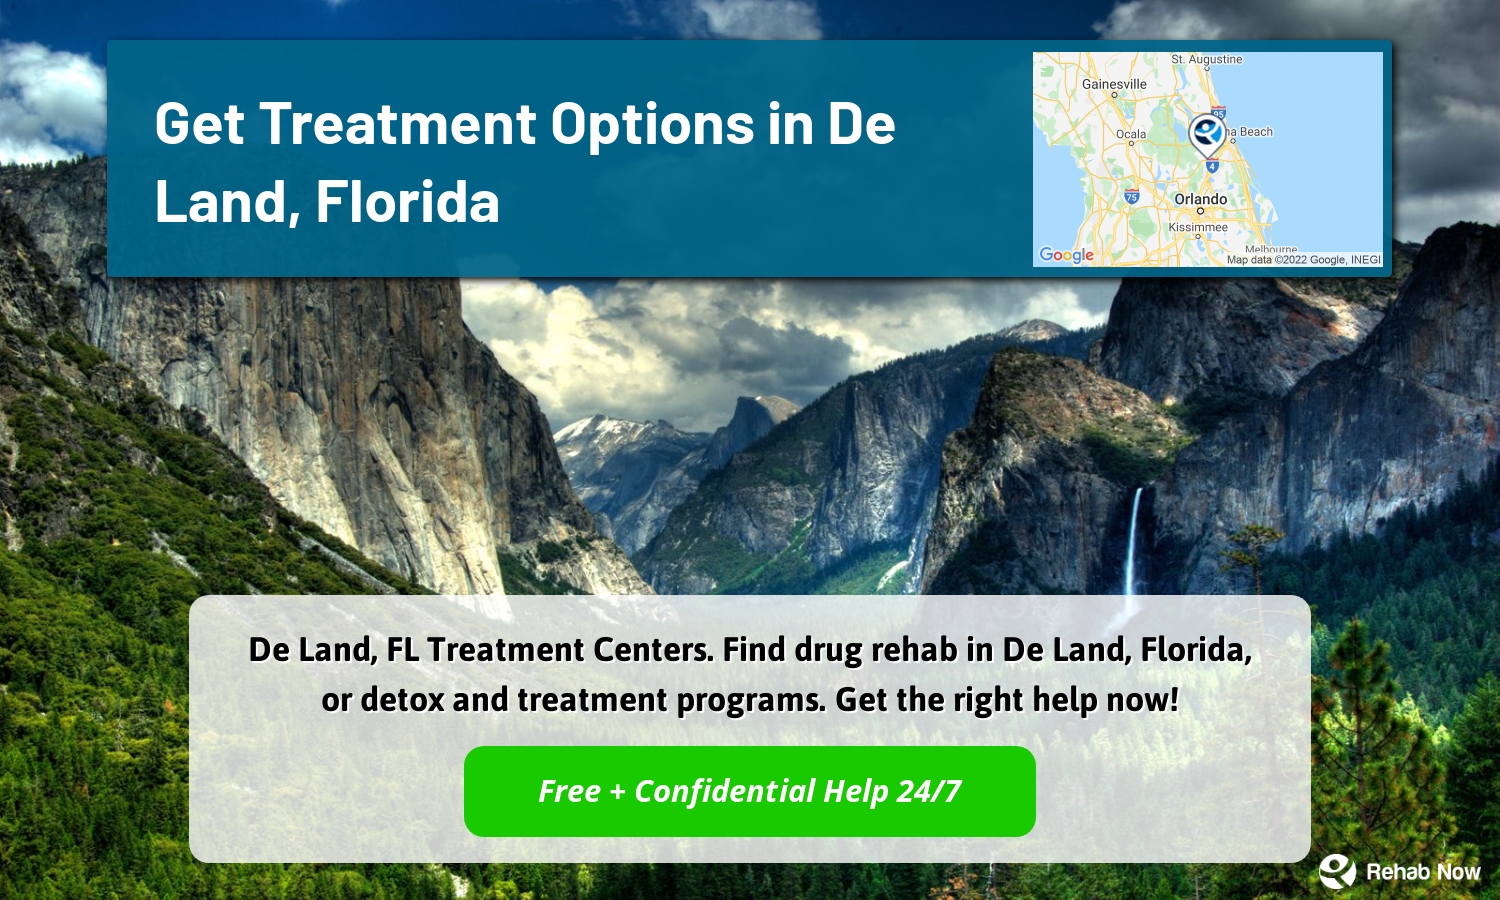 De Land, FL Treatment Centers. Find drug rehab in De Land, Florida, or detox and treatment programs. Get the right help now!